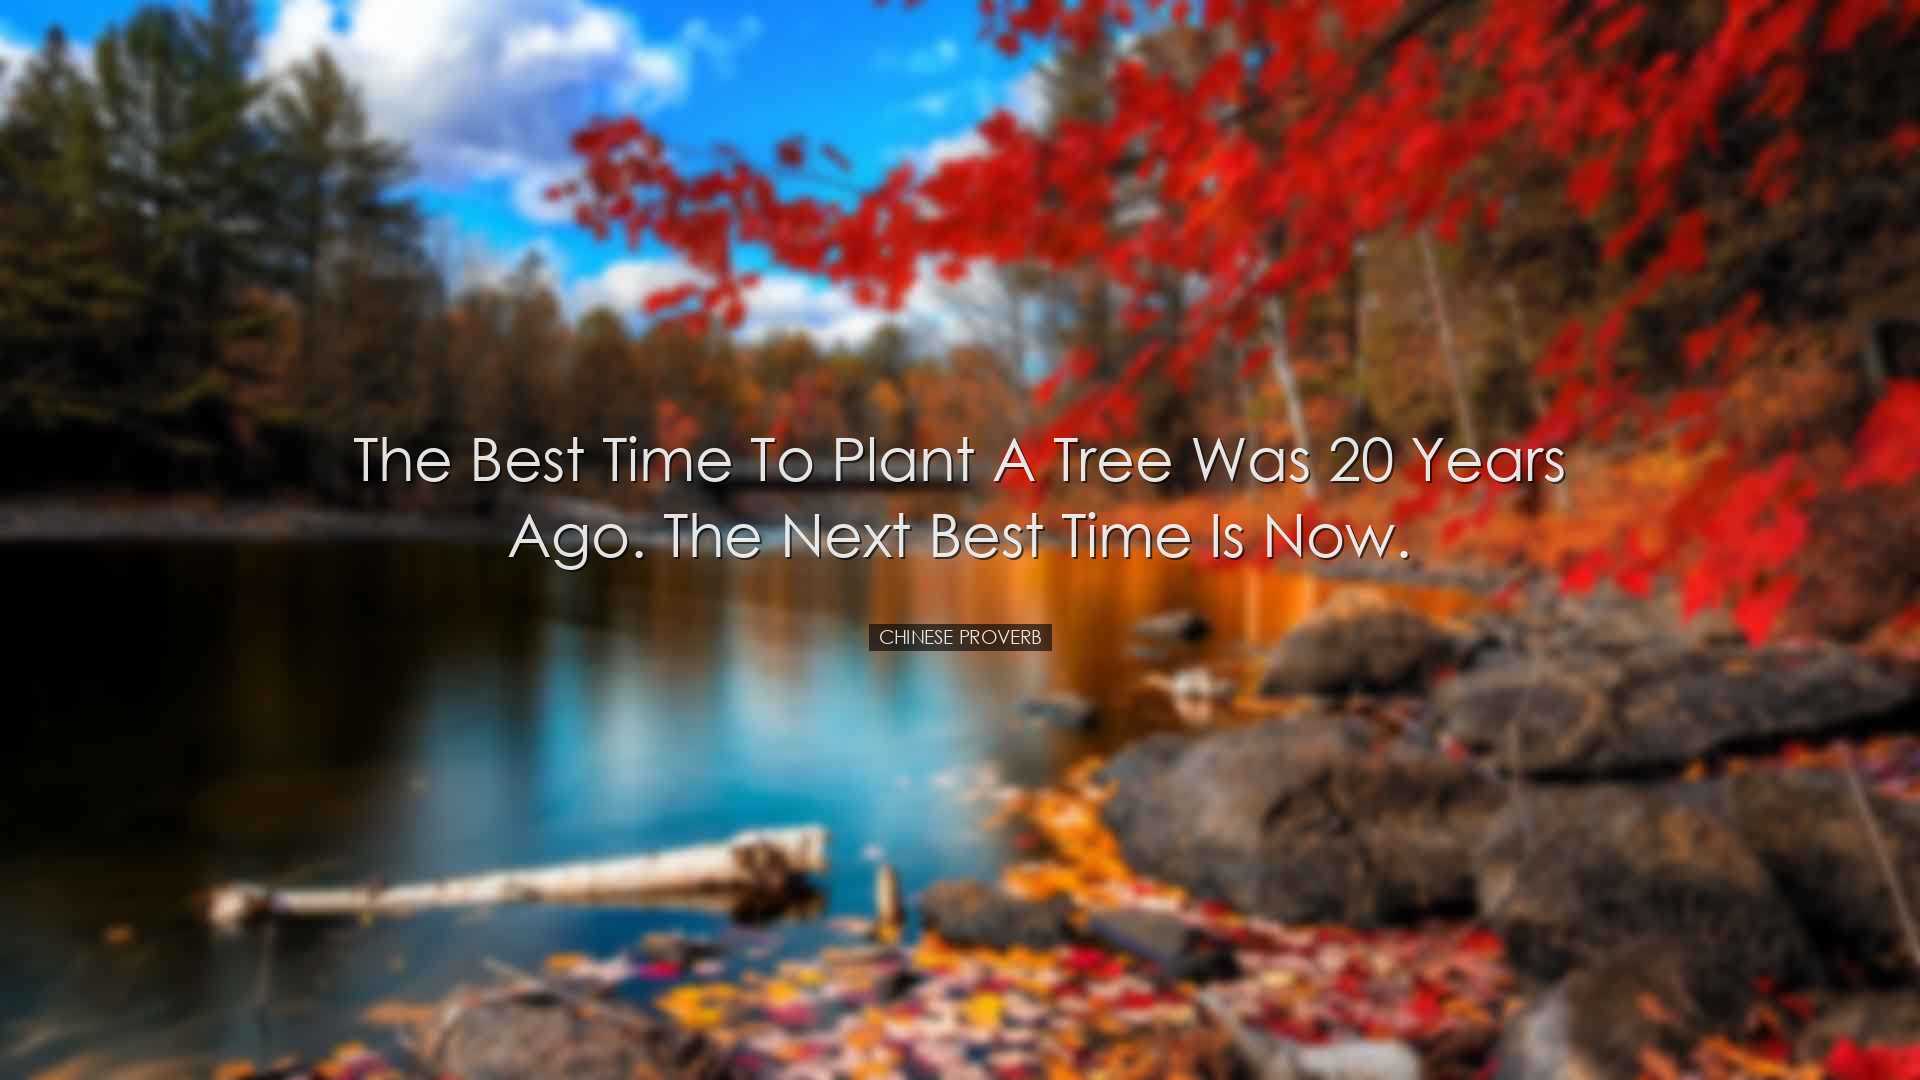 The best time to plant a tree was 20 years ago. The next best time